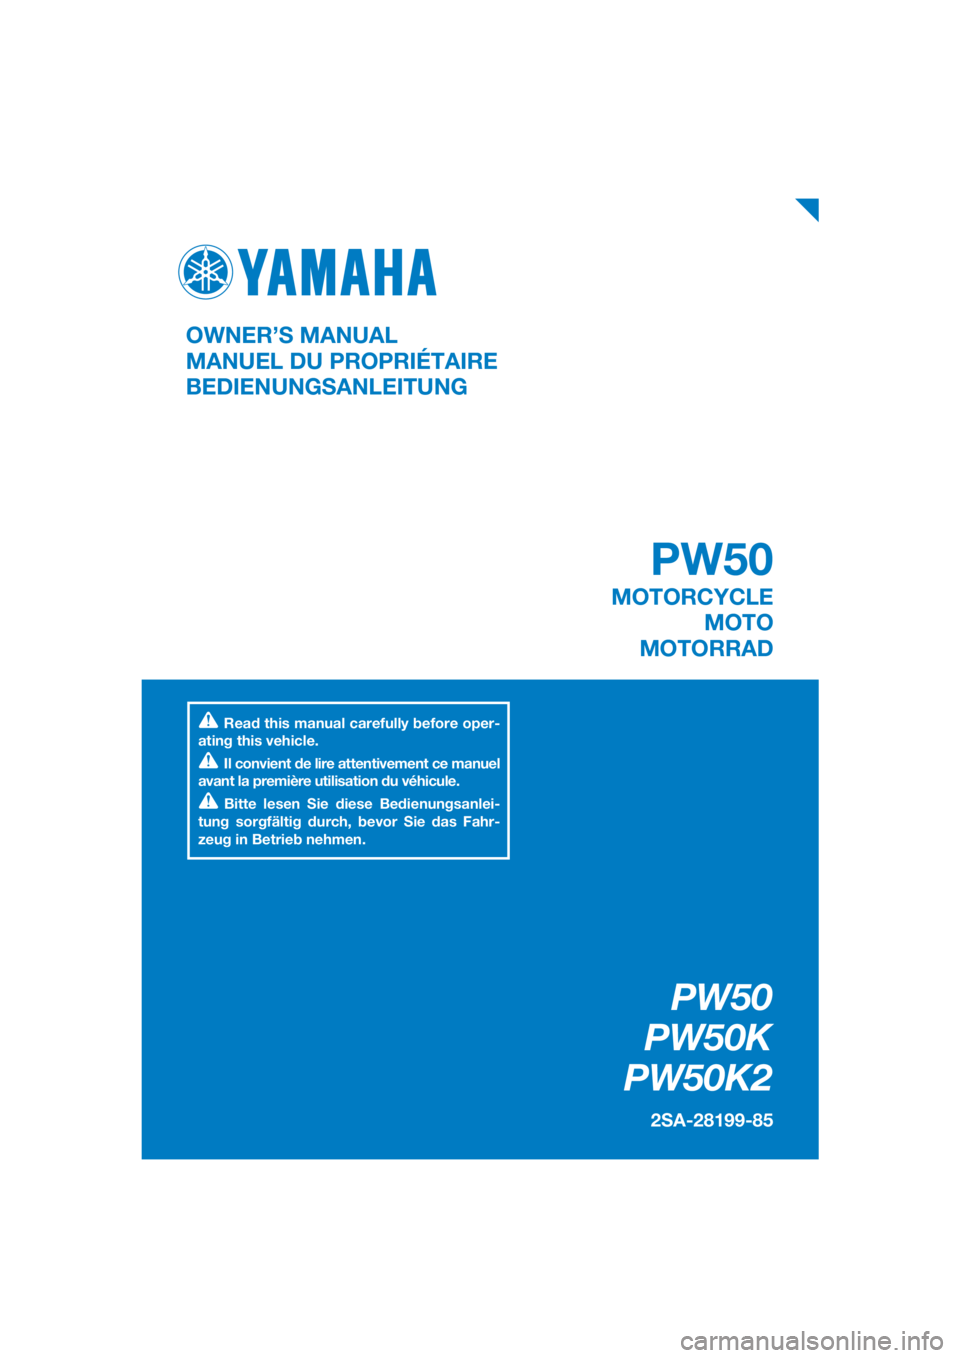 YAMAHA PW50 2019  Owners Manual DIC183
PW50
PW50K
PW50K2
2SA-28199-85
OWNER’S MANUAL
MANUEL DU PROPRIÉTAIRE
BEDIENUNGSANLEITUNG
Read this manual carefully before oper-
ating this vehicle.
Il convient de lire attentivement ce manu